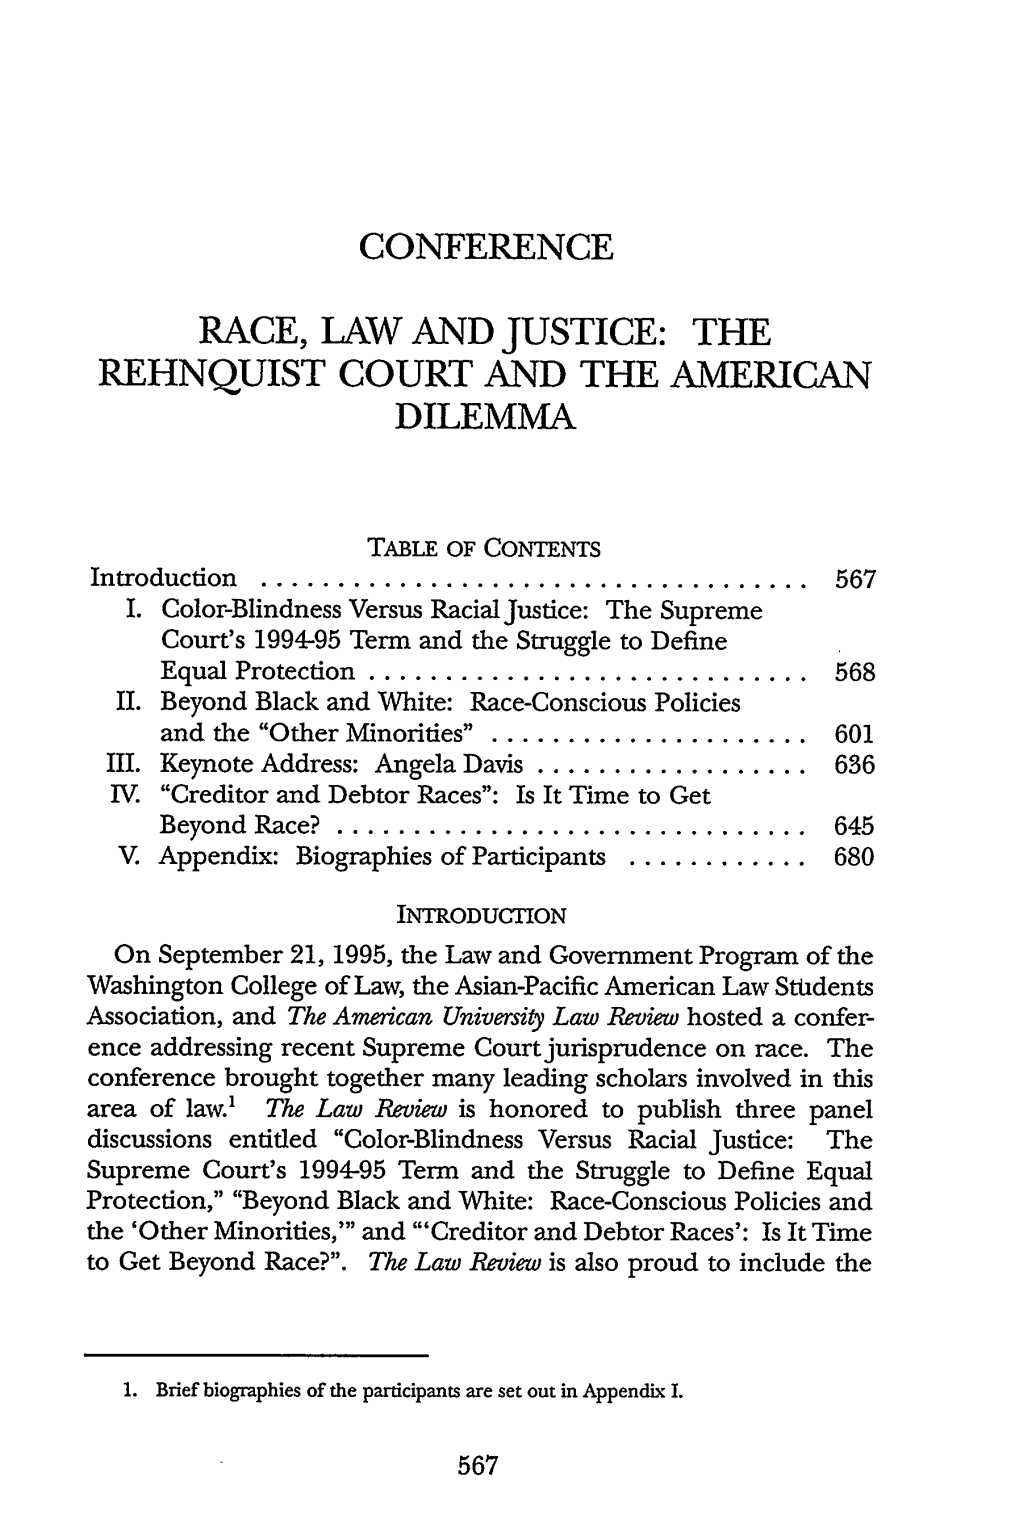 The Rehnquist Court and the American Dilemma